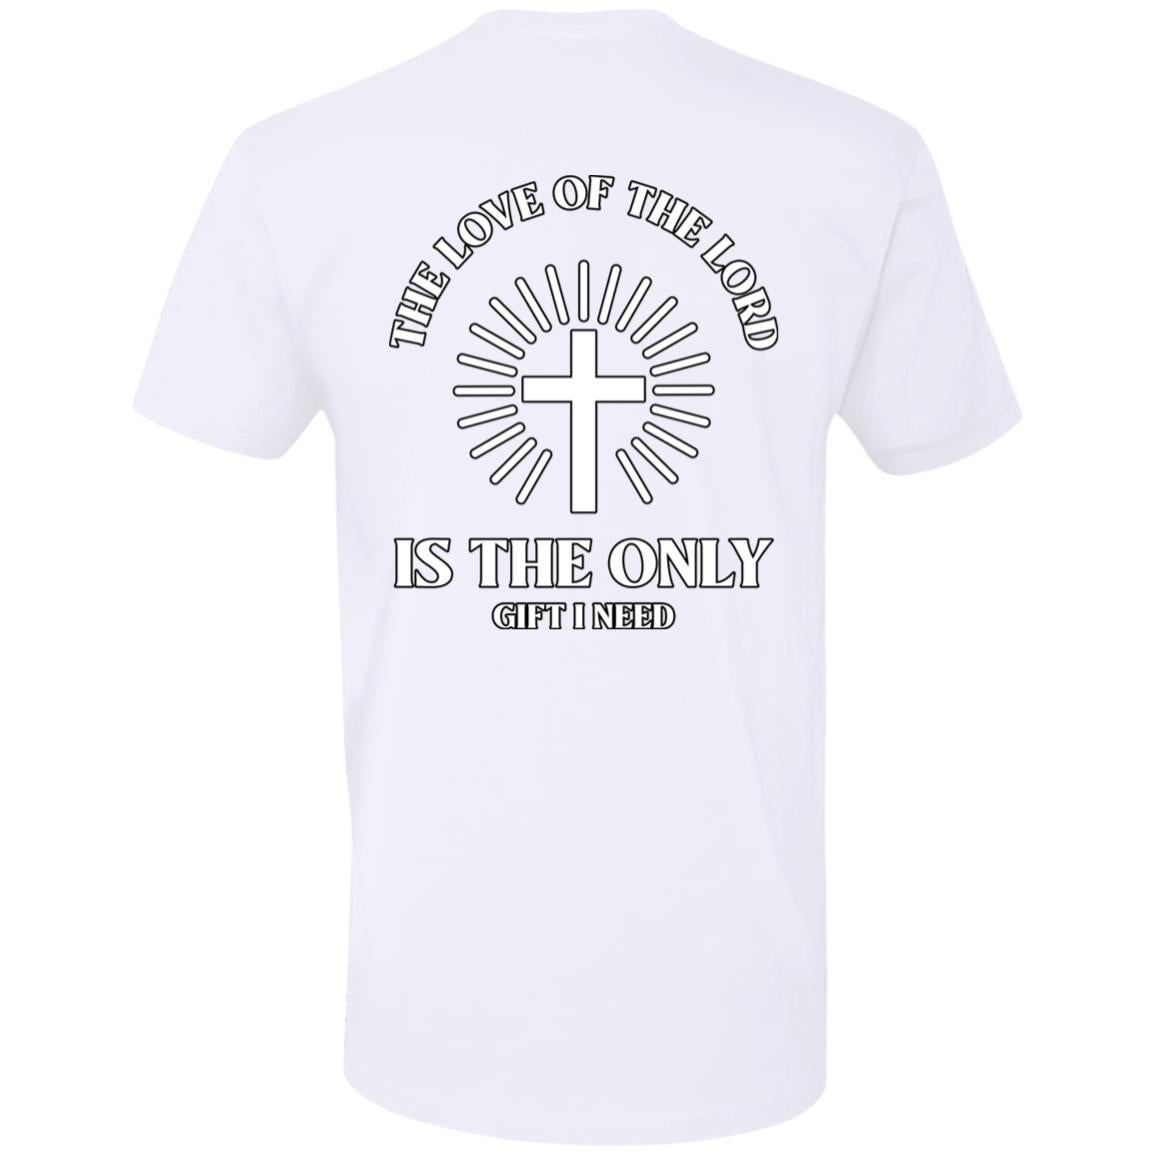 The Love of the Lord (Unisex Tee)